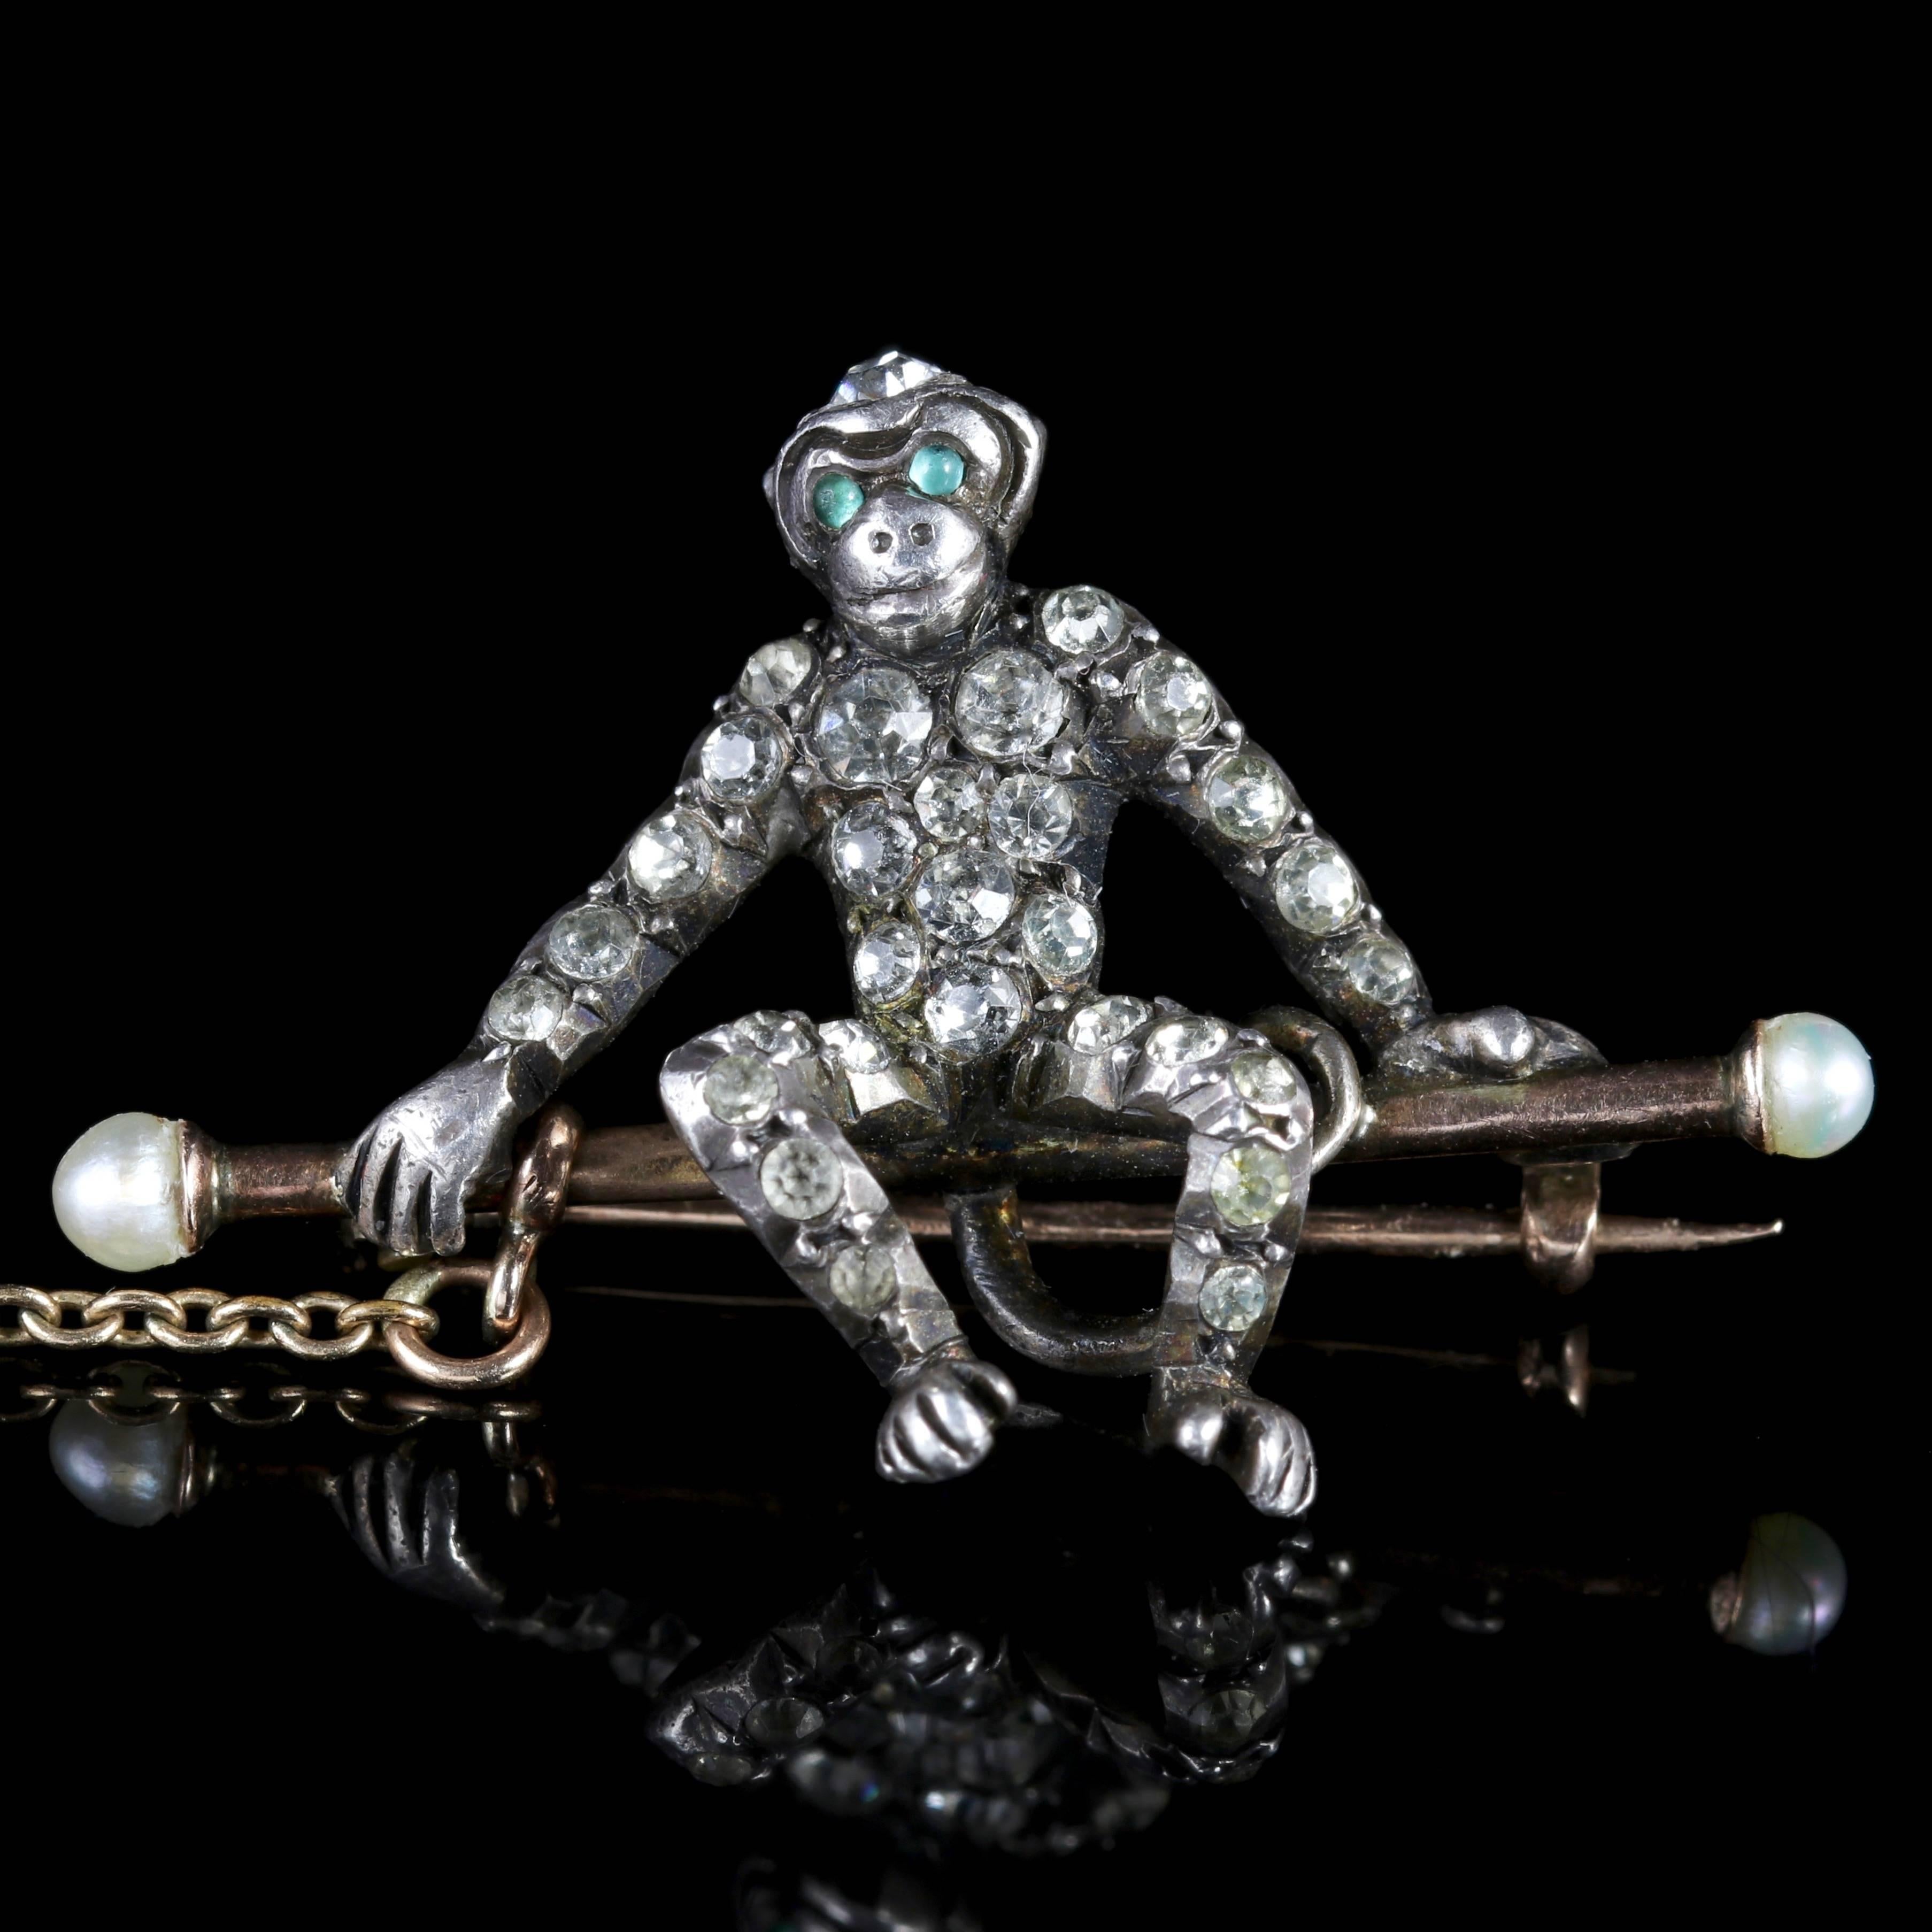 To read more please click continue reading below-

This fabulous 9ct Gold and Silver Edwardian Paste monkey brooch is Circa 1910.

This pleasant brooch depicts two smiling monkeys, one seated on a bar and the other hanging playfully from a chain.